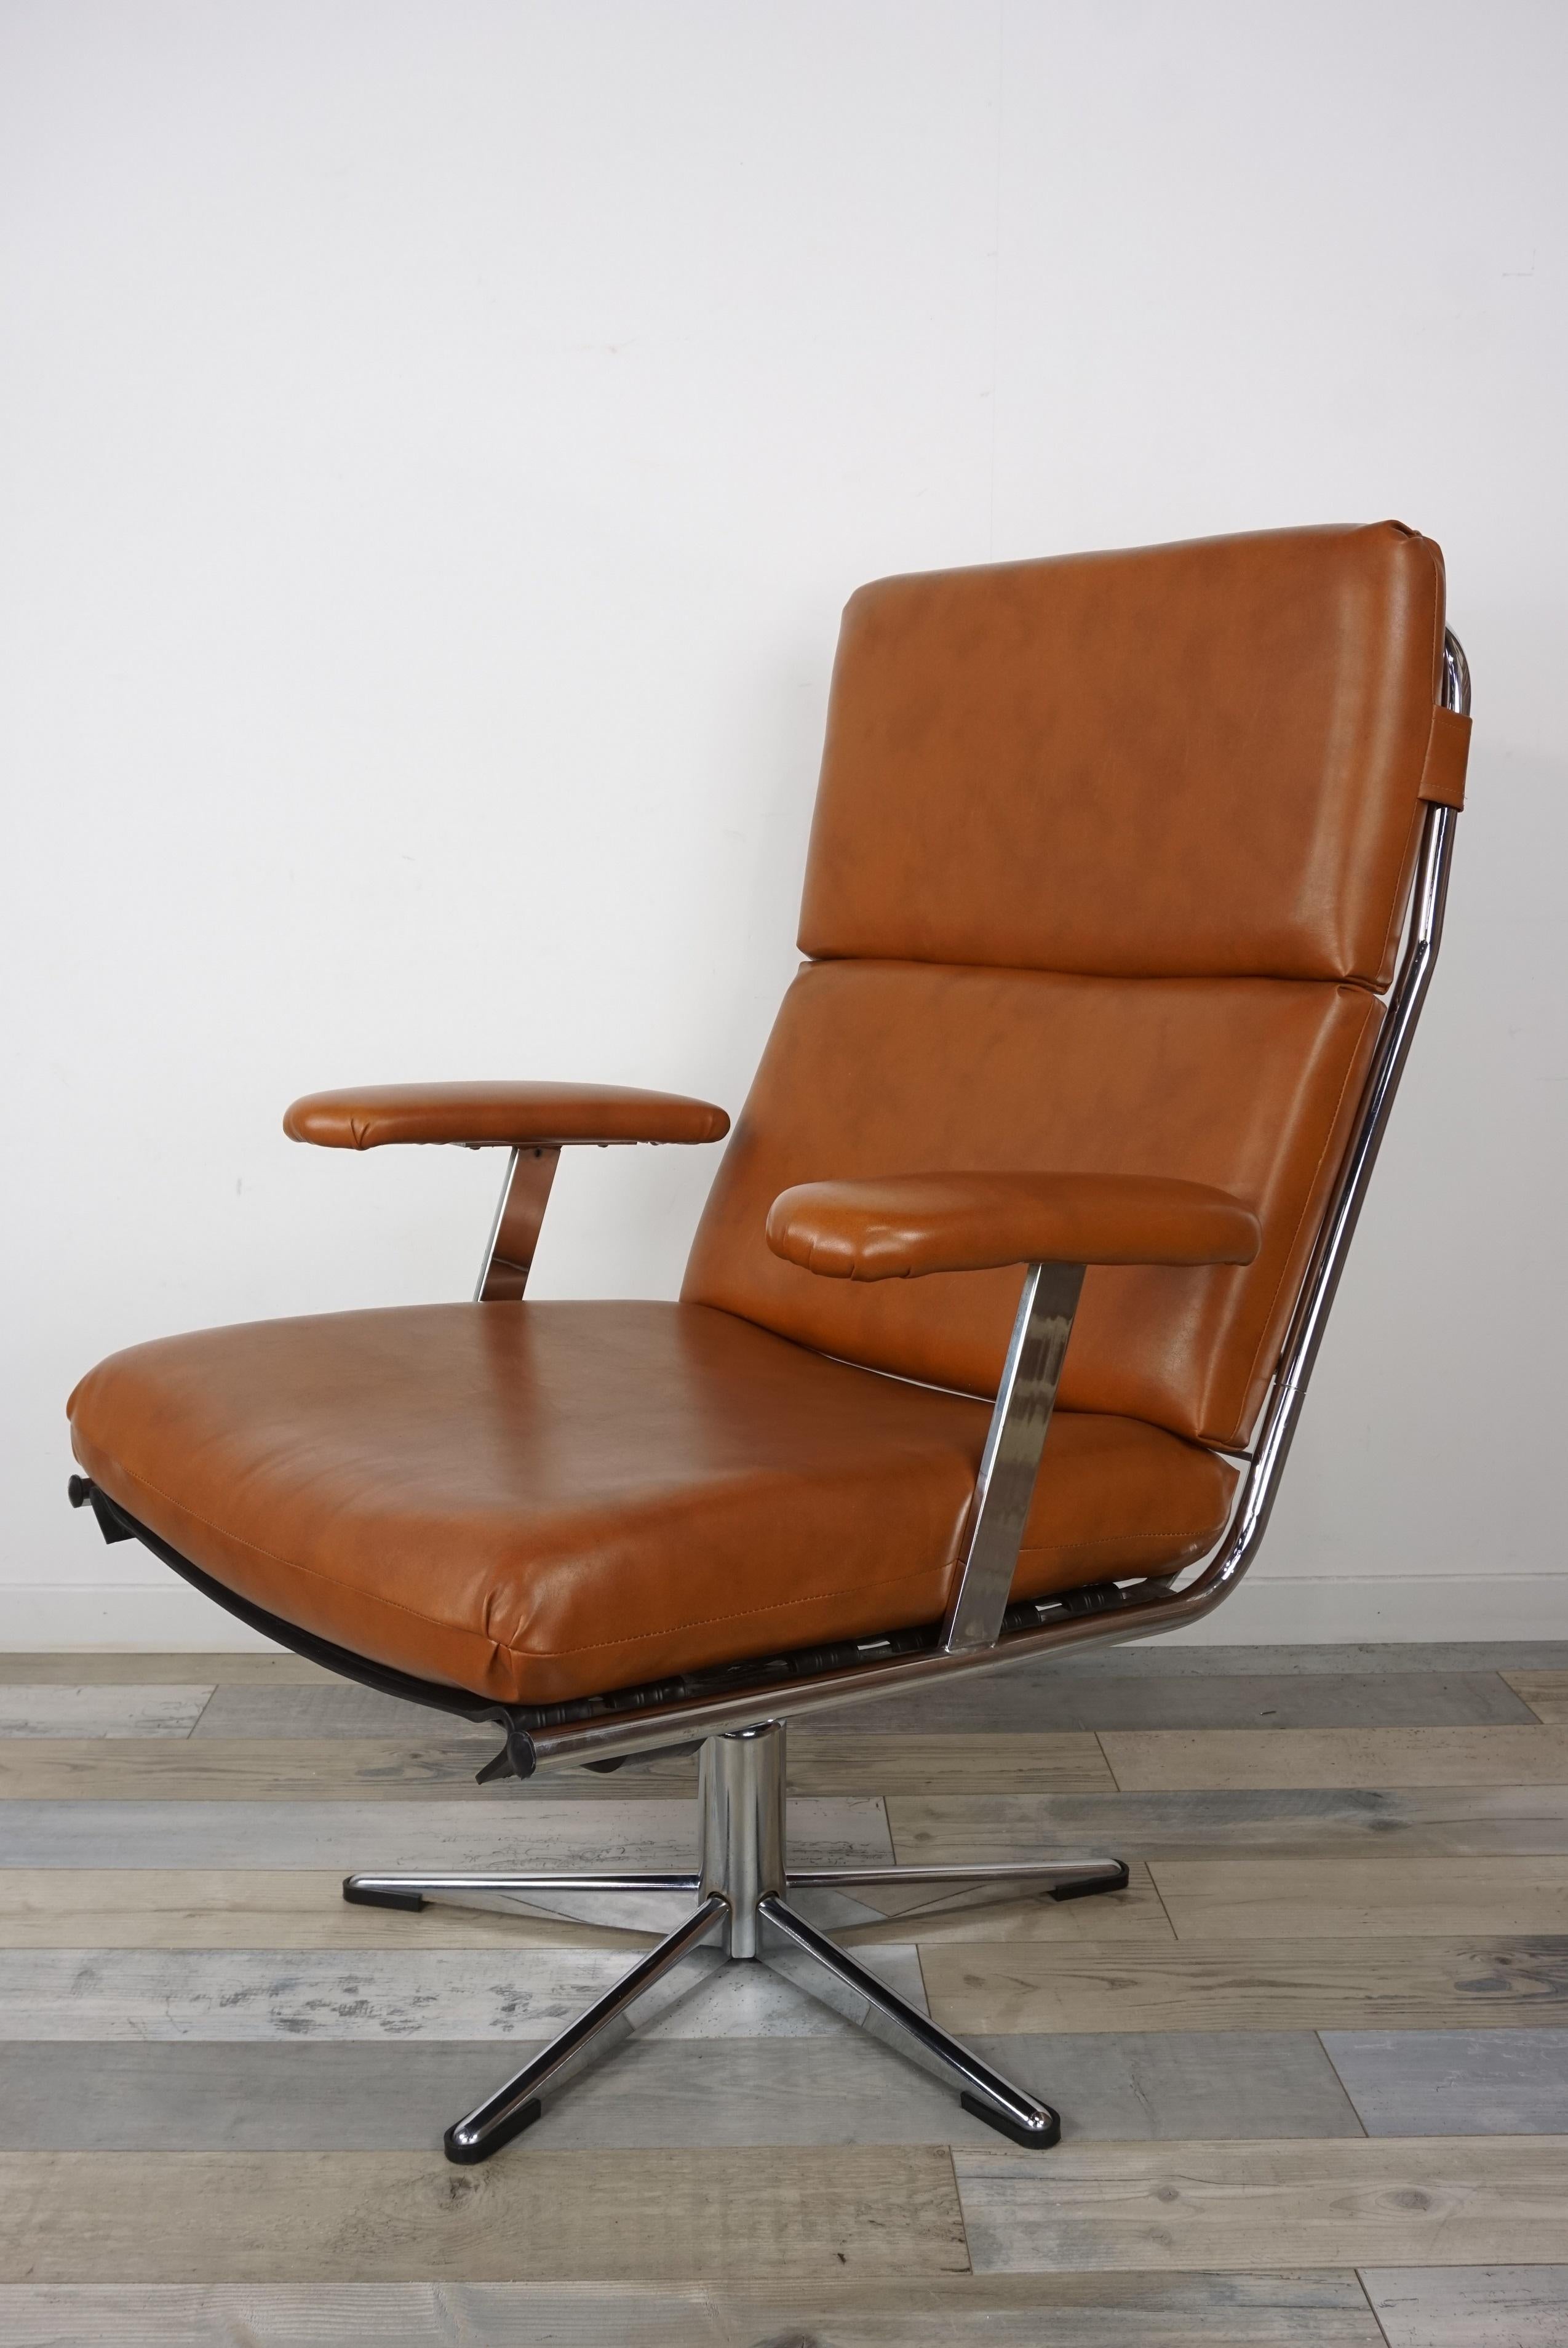 Pair of lounge armchairs from the 1950s-1960s with a tubular chrome overlay structure lined with cognac colored leather (the seat and back cushions are removable). Retro look, beautiful quality, the height of the armrests is 60 cm, the seat height